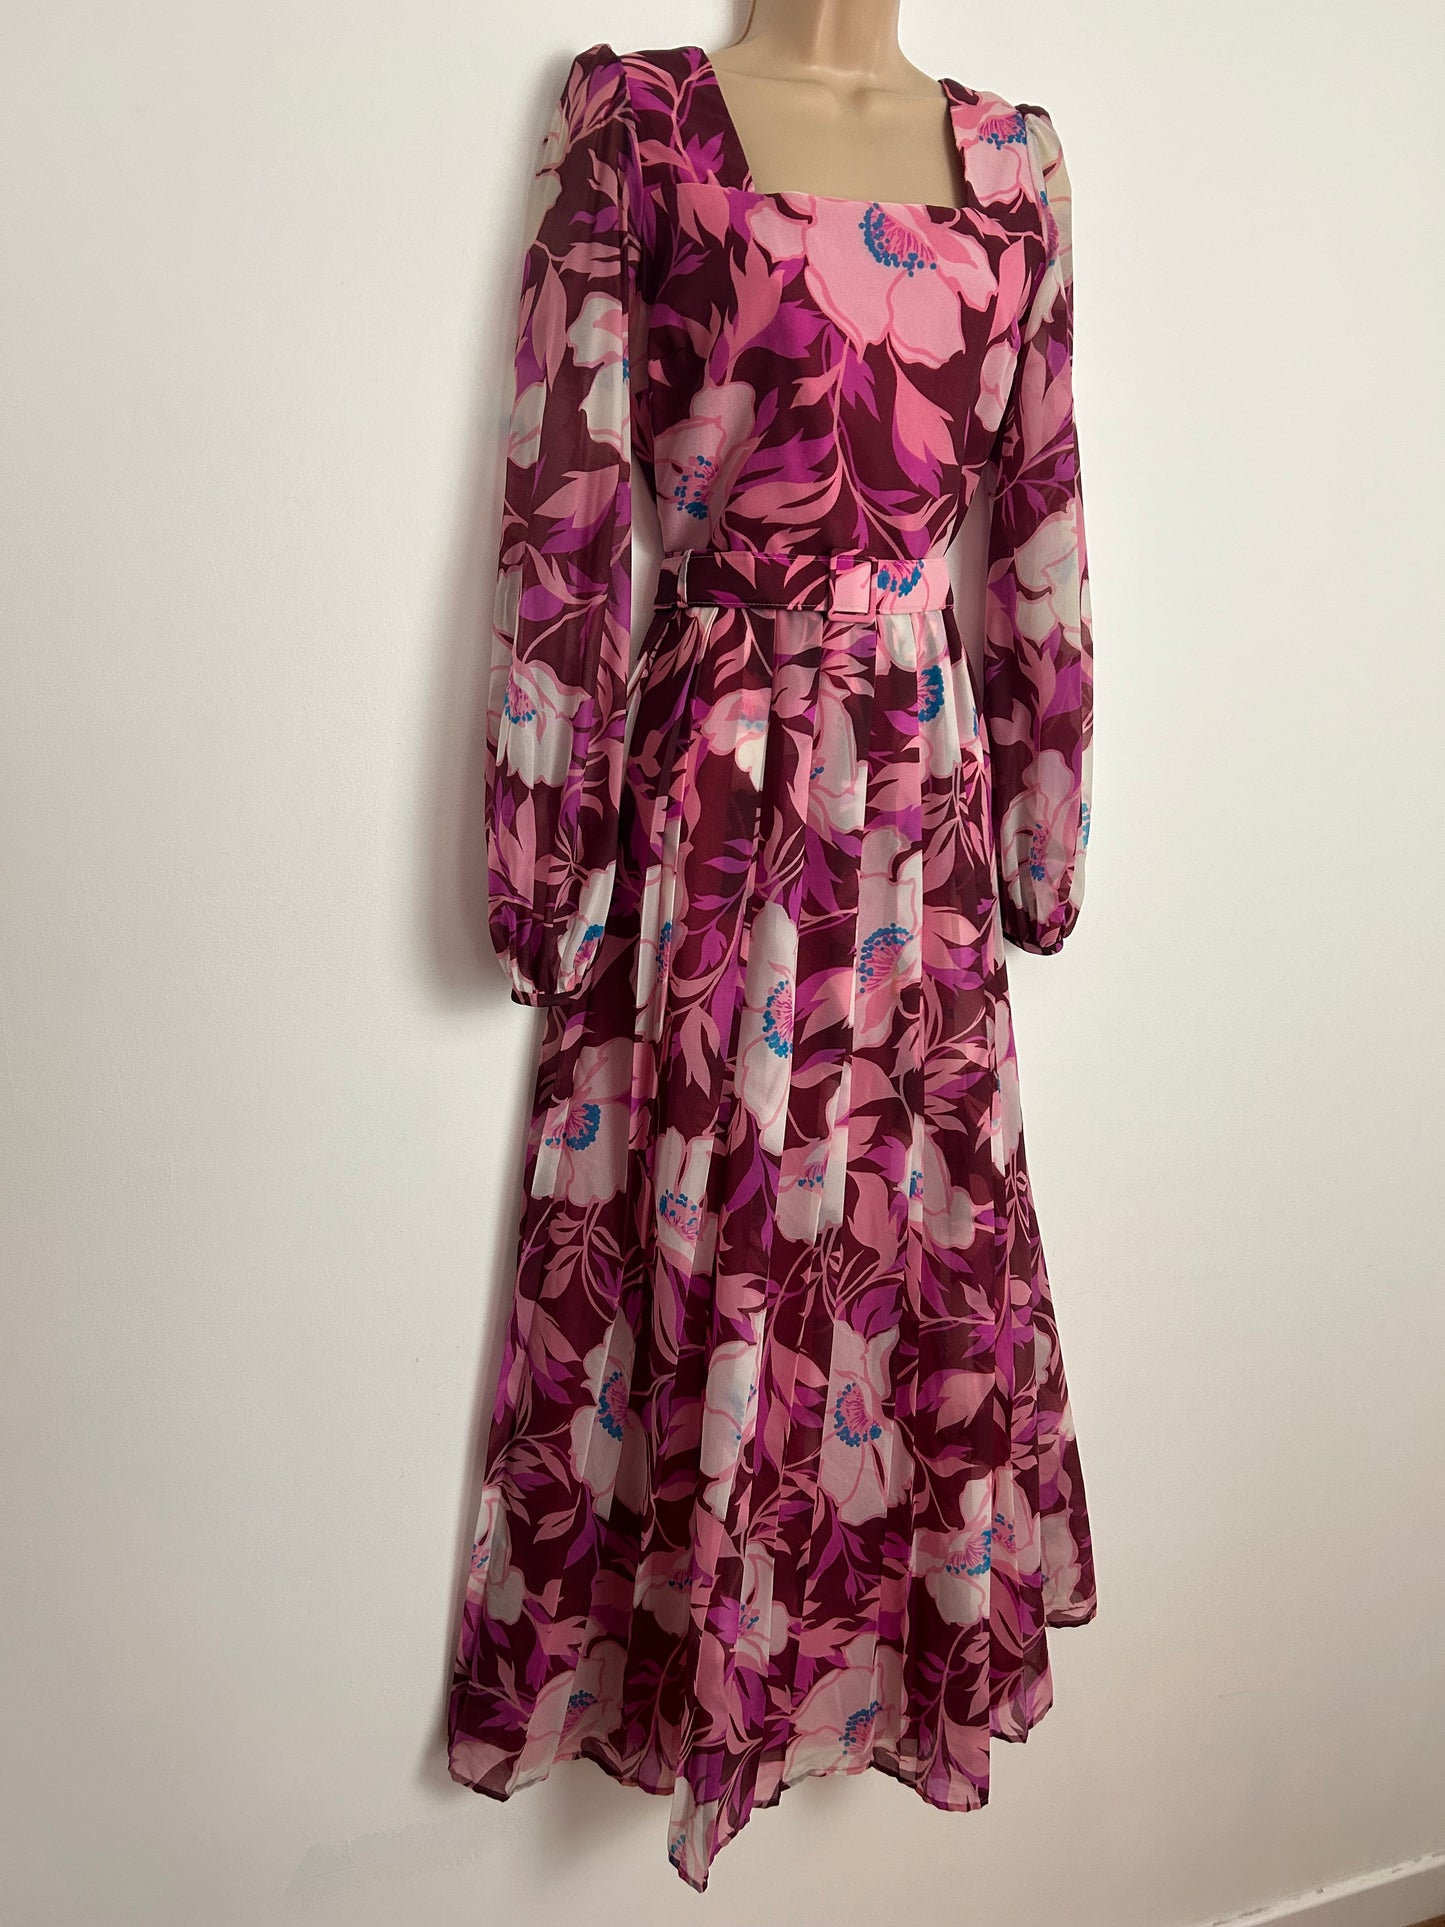 Vintage 1970s UK Size 10 Dark Pink Tones Floral Print Long Sleeve Belted Pleated Maxi Dress